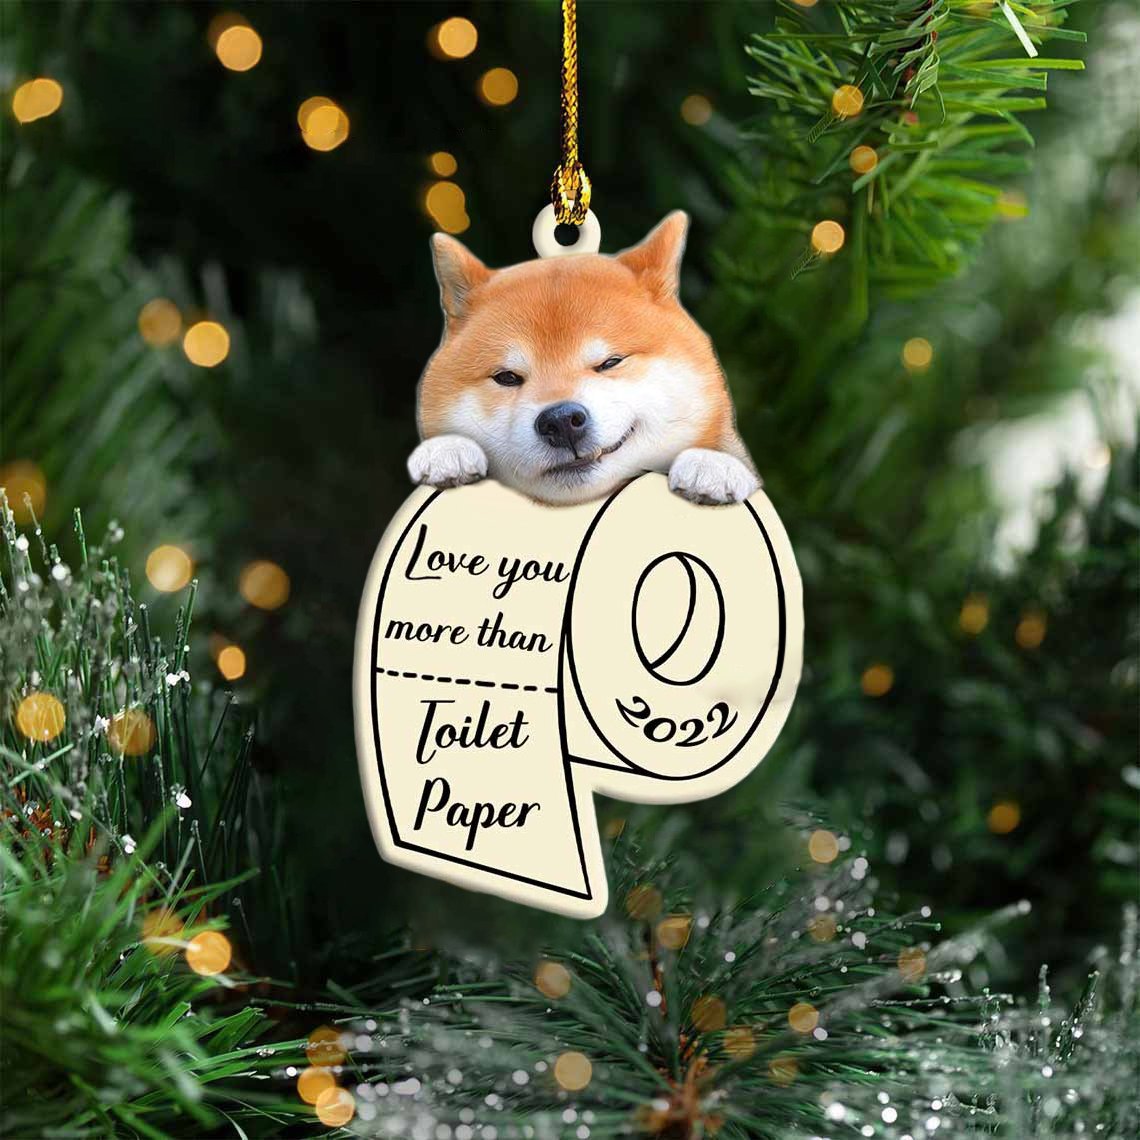 Shiba Inu Love You More Than Toilet Paper 2022 Hanging Ornament